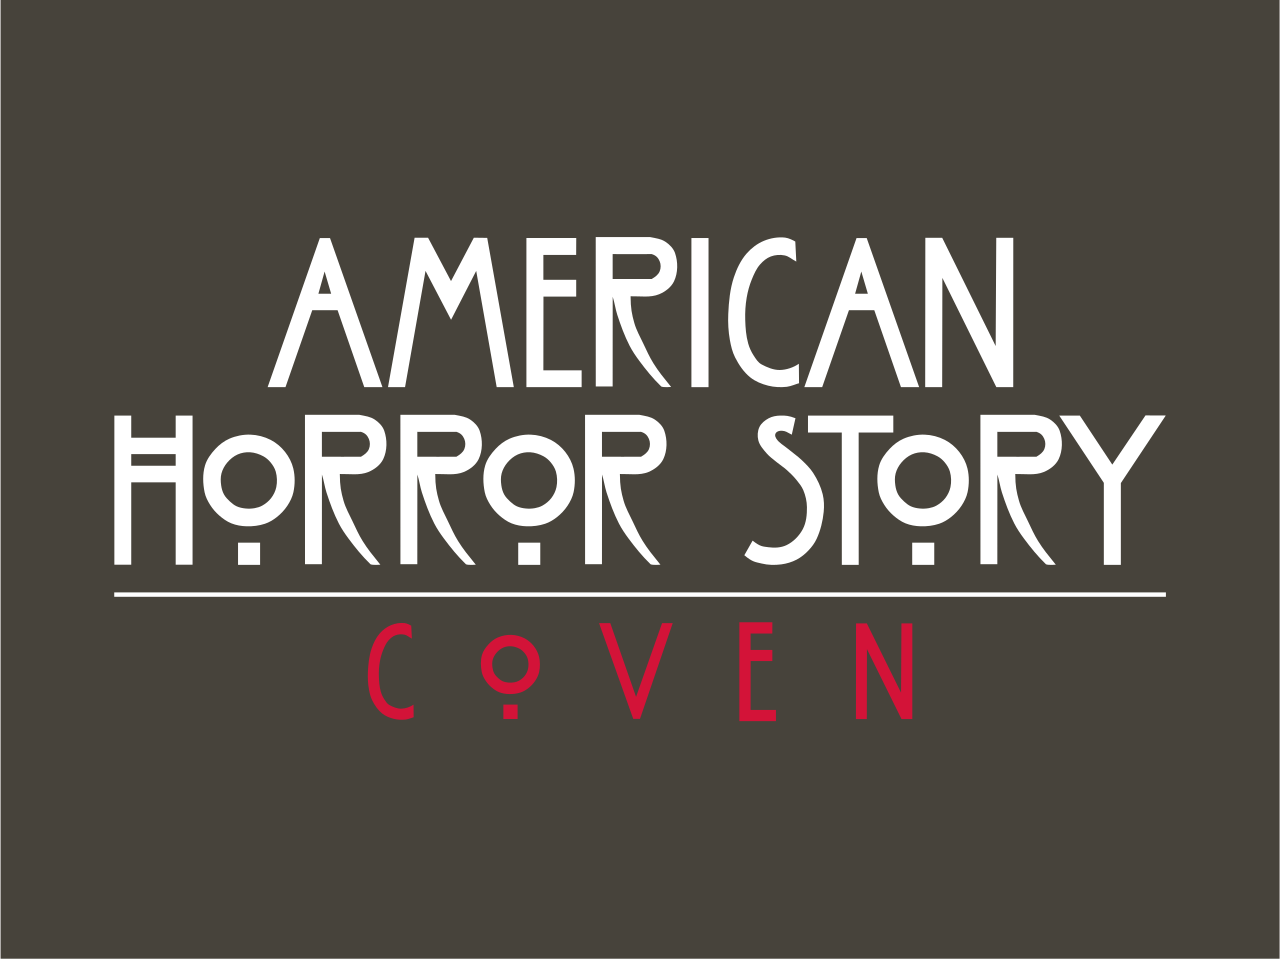 File:American Horror Story Coven - DVD.svg - Wikipedia